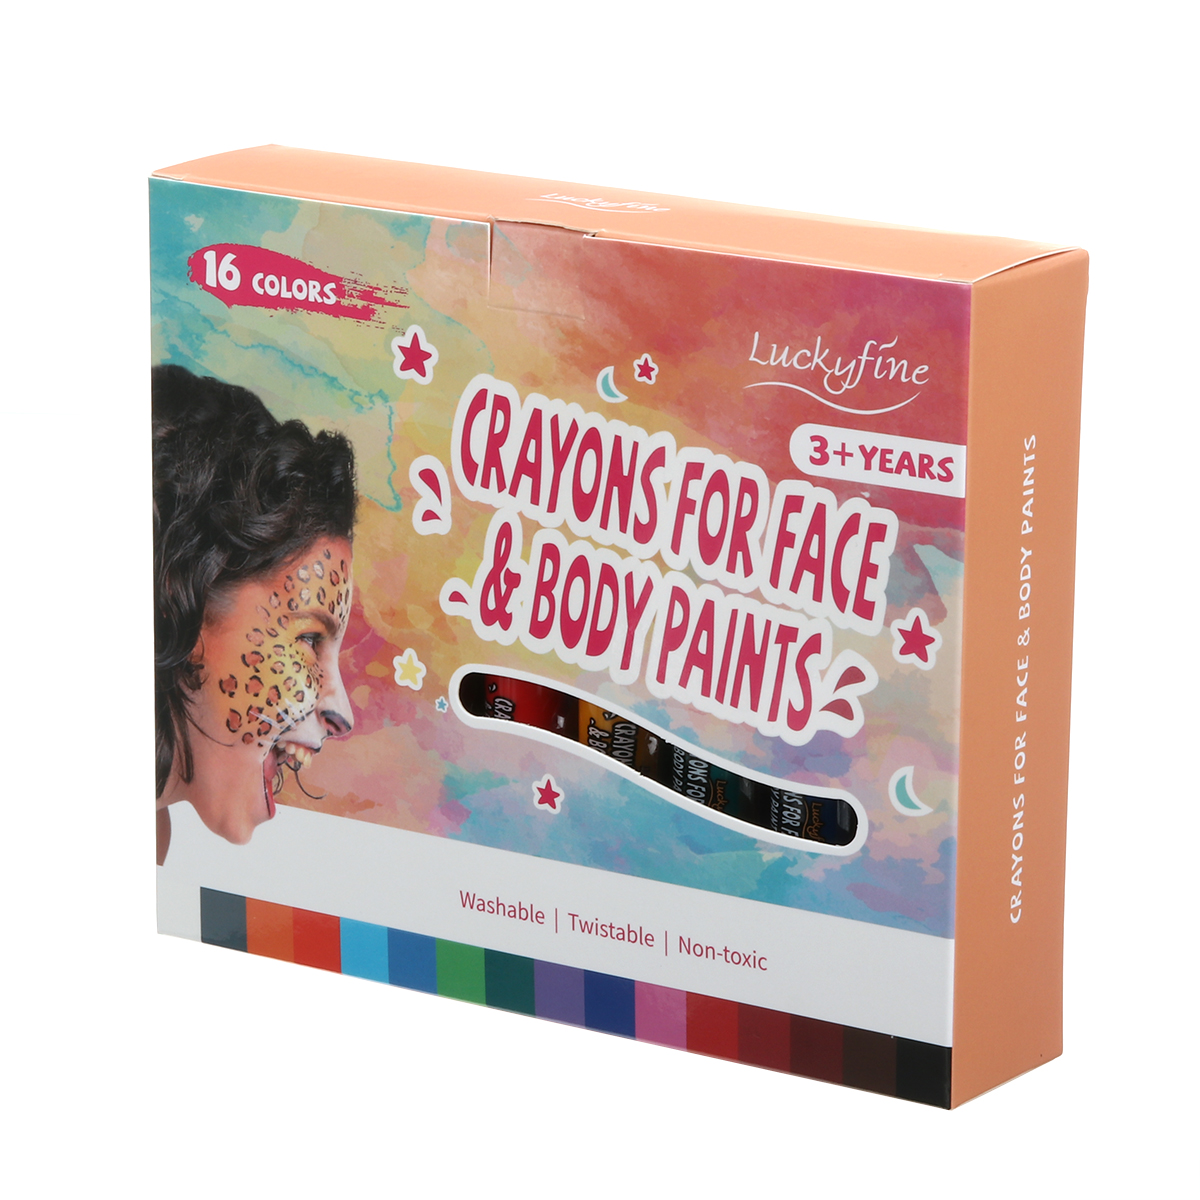 Paint-Crayons-Kit-Luckyfine-Face--Body-Paint-Crayons-Set-for-Kids-Safe-Non-Toxic-and-Non-irritating--1900414-10